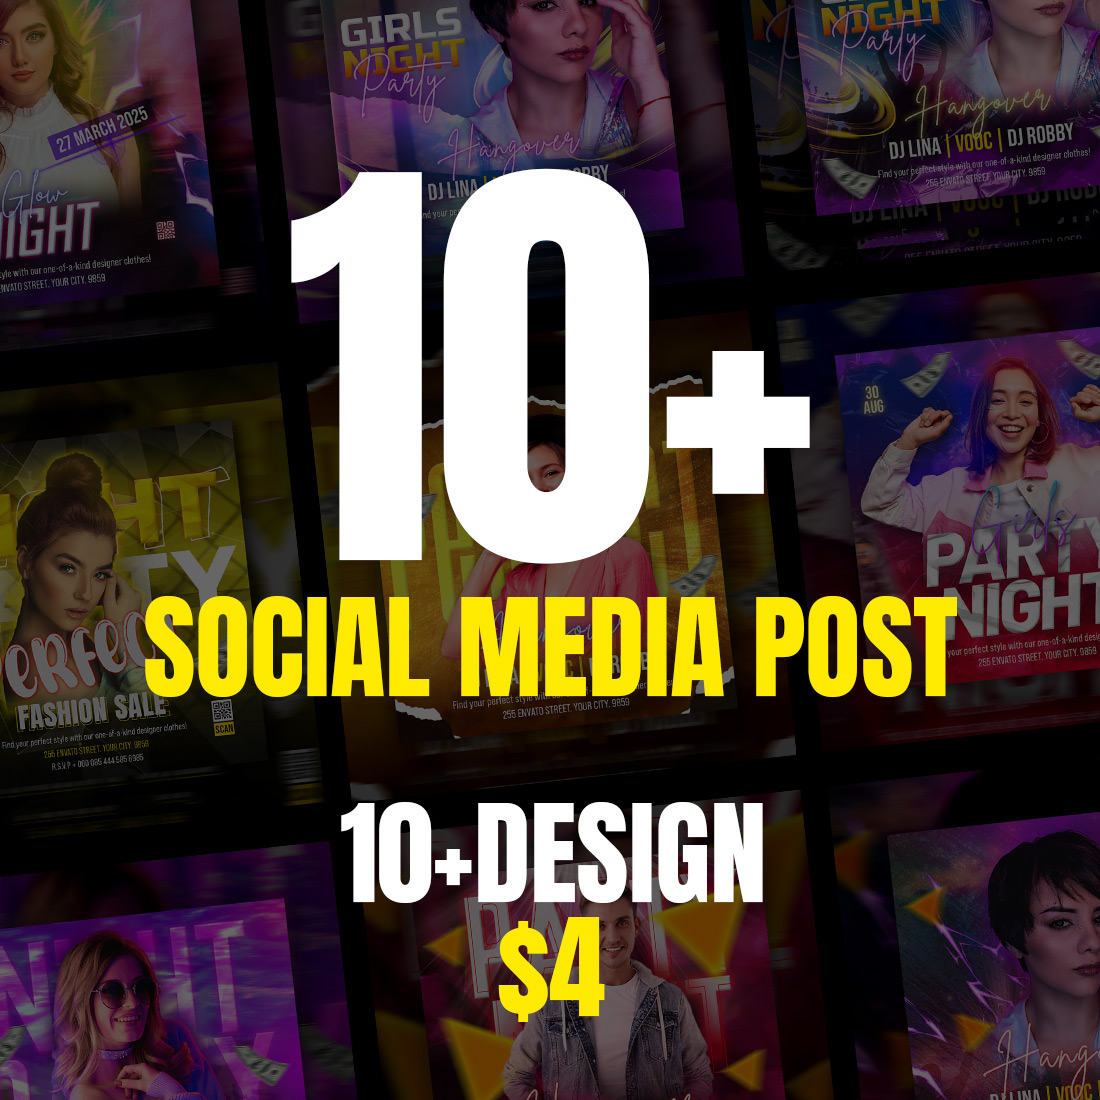 10+Fashion sale banner or flyer social media post and web banner Premium template-only $4 preview image.